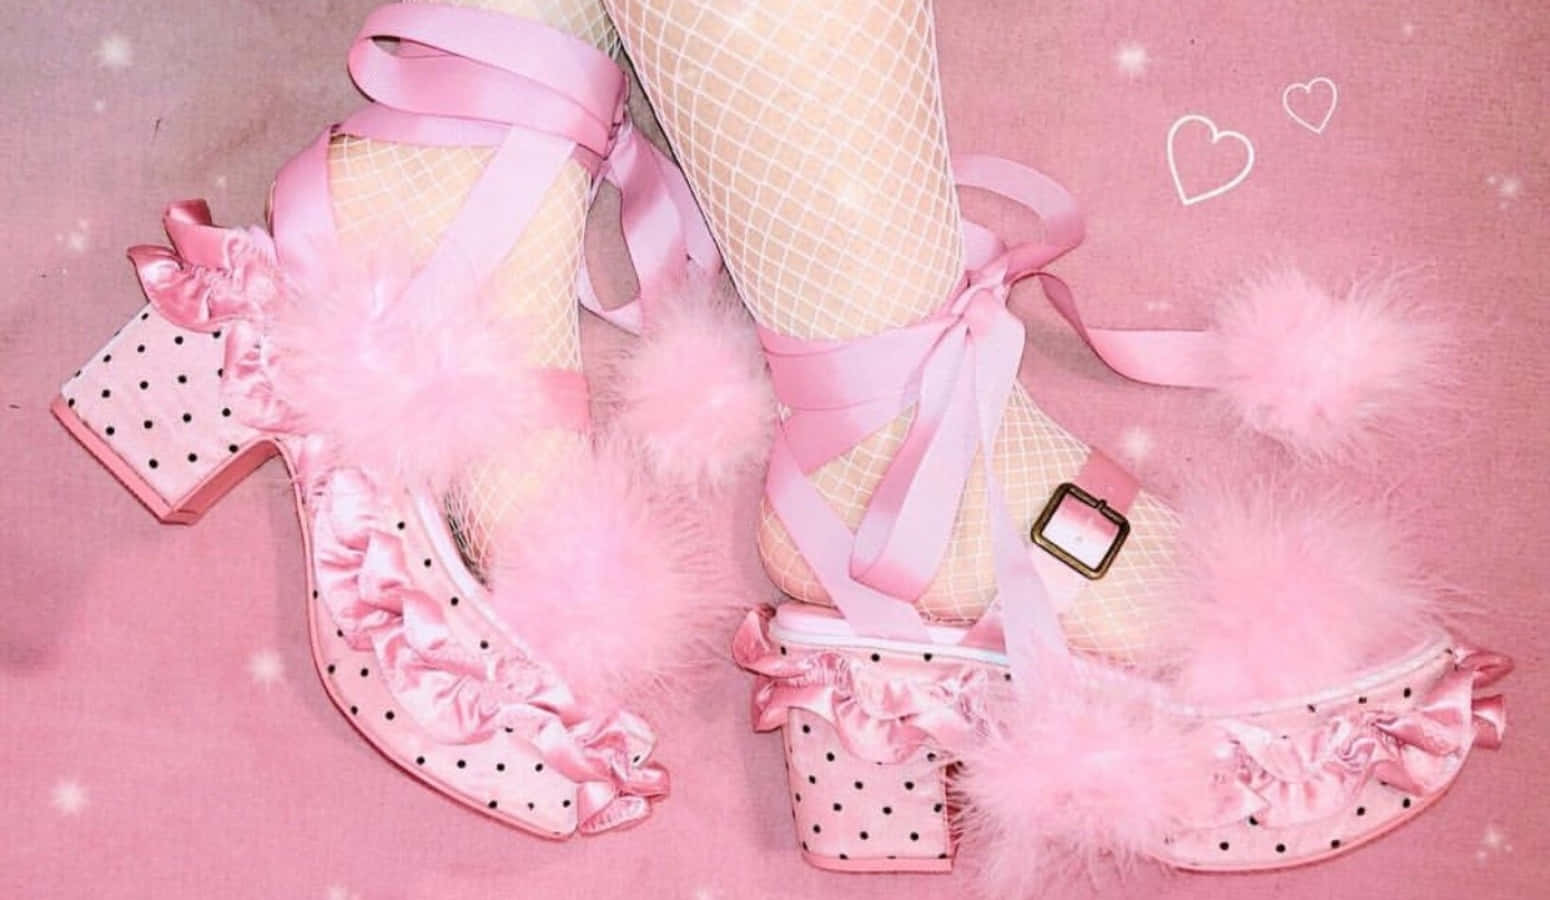 Stylish Pink Shoes on a Wooden Floor Wallpaper